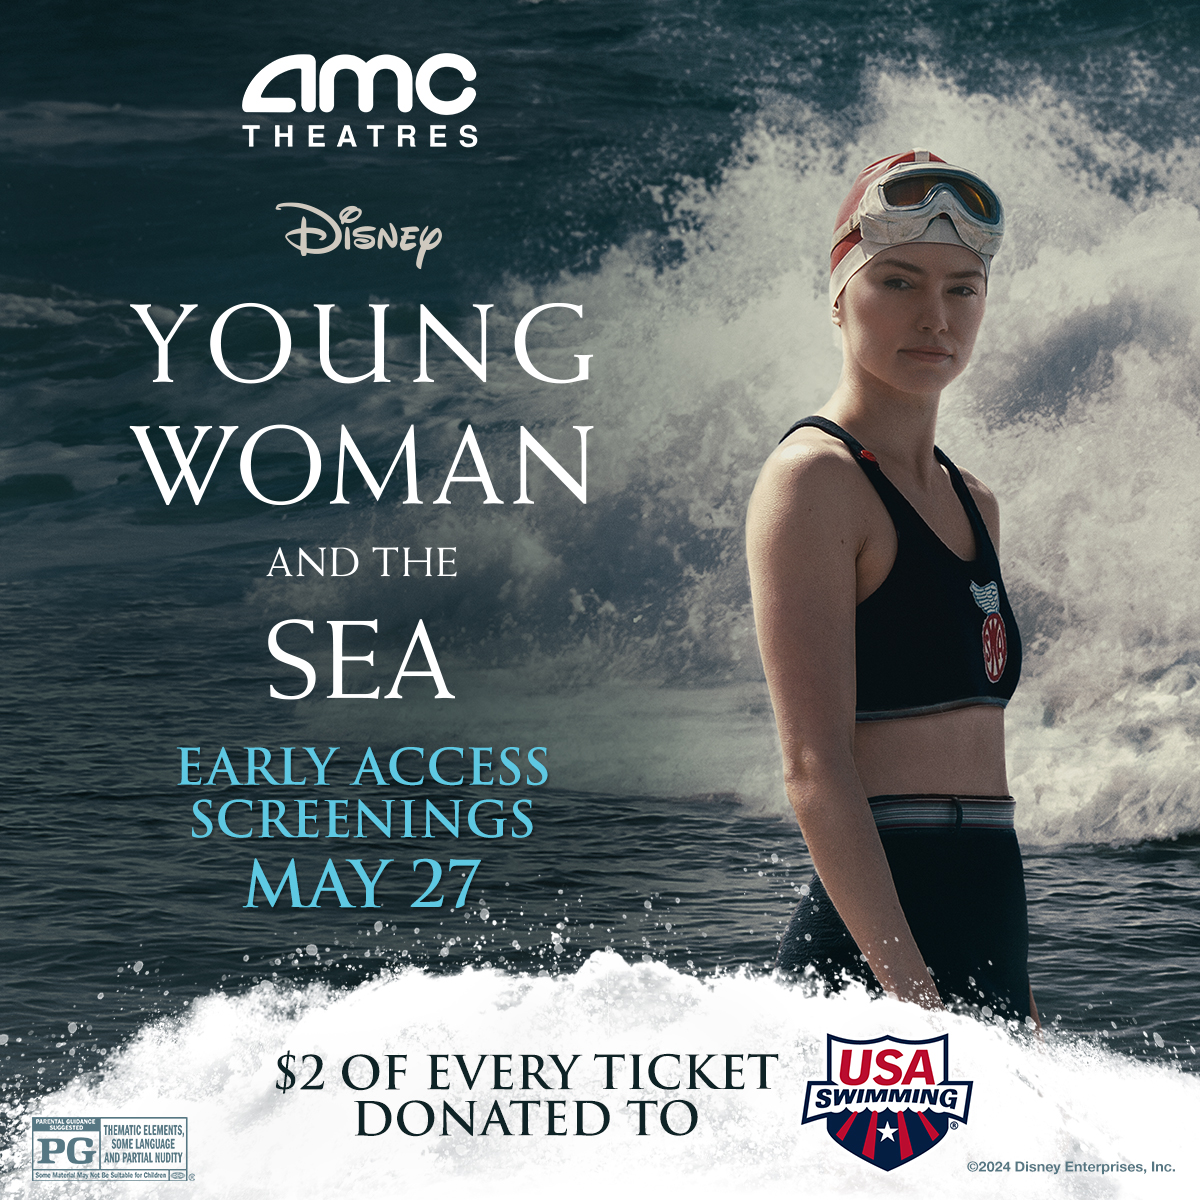 🏊 Join us for an early screening of Young Woman and the Sea at select AMC Theatres on 5/27, where a portion of each ticket sold will go to support the non-profit USA Swimming! Get tickets now! amc.film/3QzCoSW